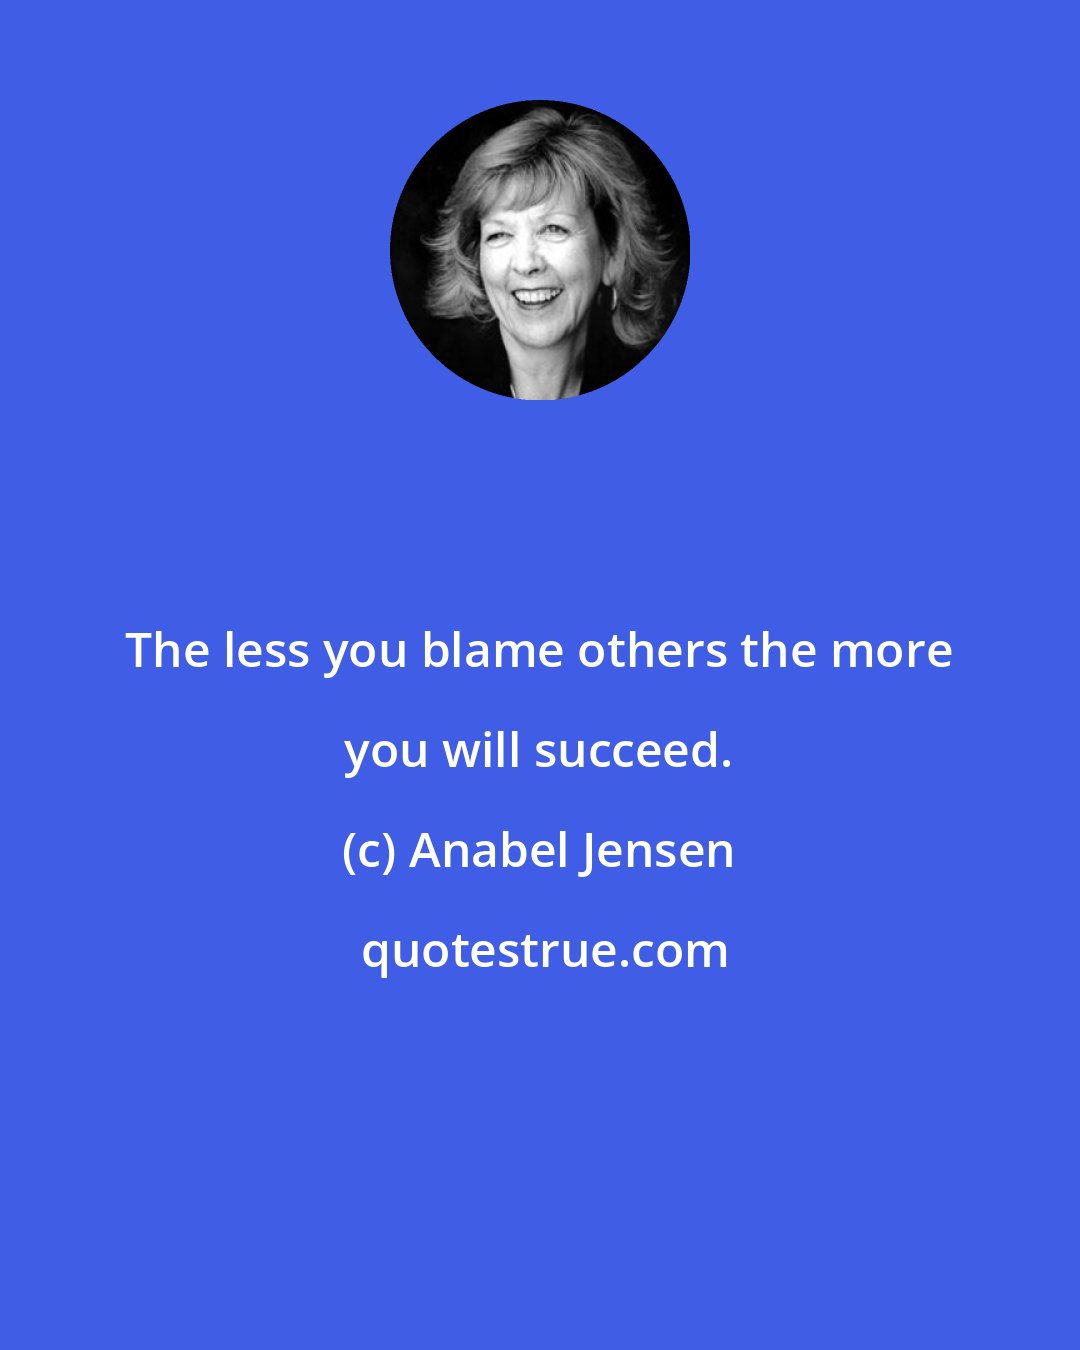 Anabel Jensen: The less you blame others the more you will succeed.